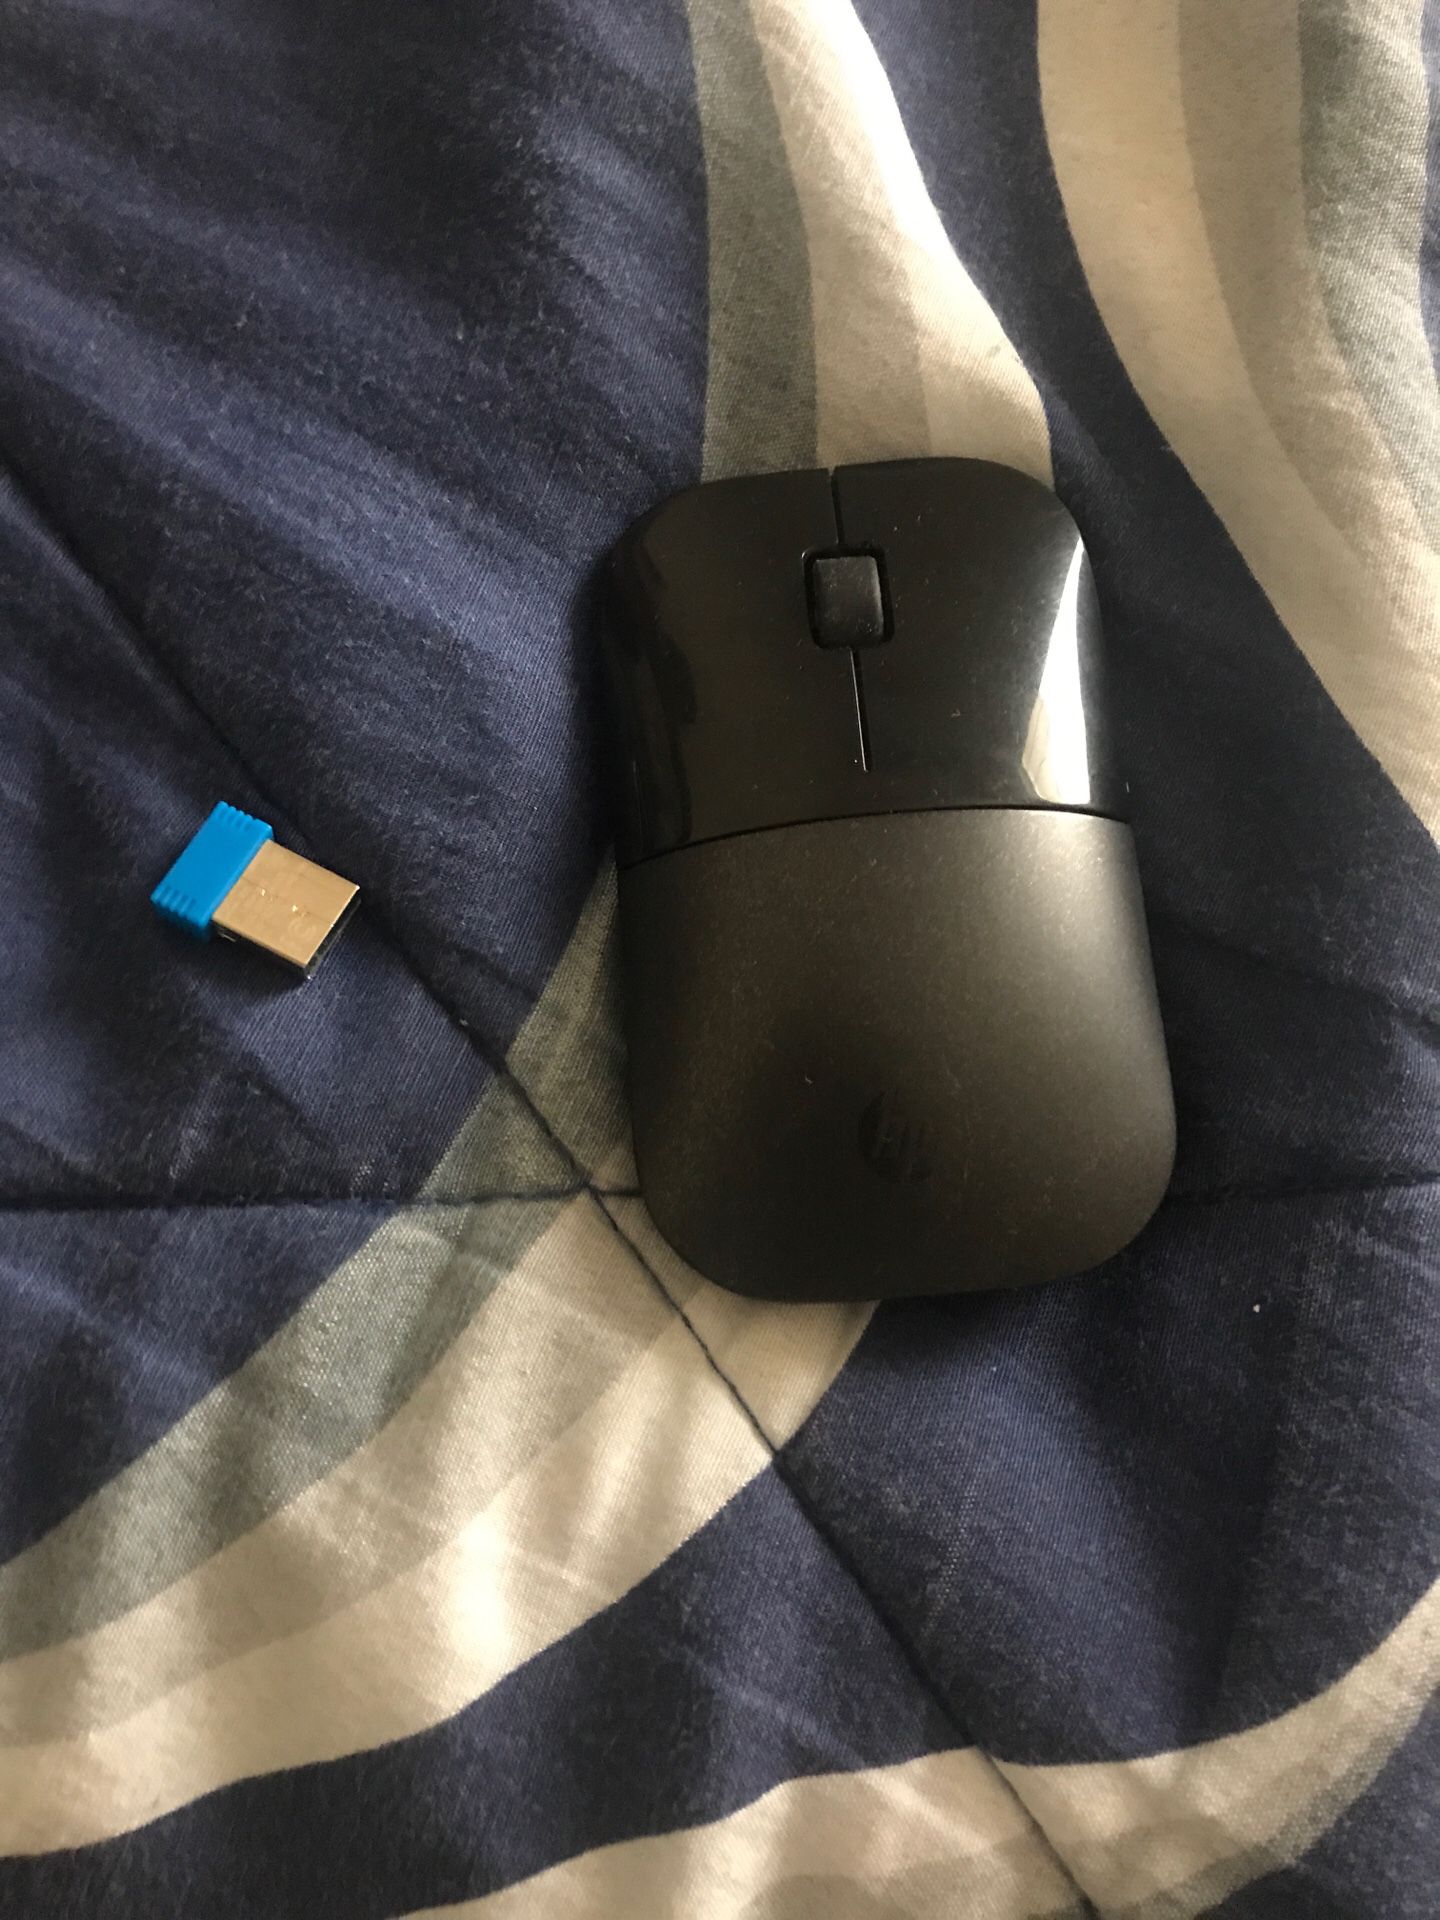 Wireless hp mouse